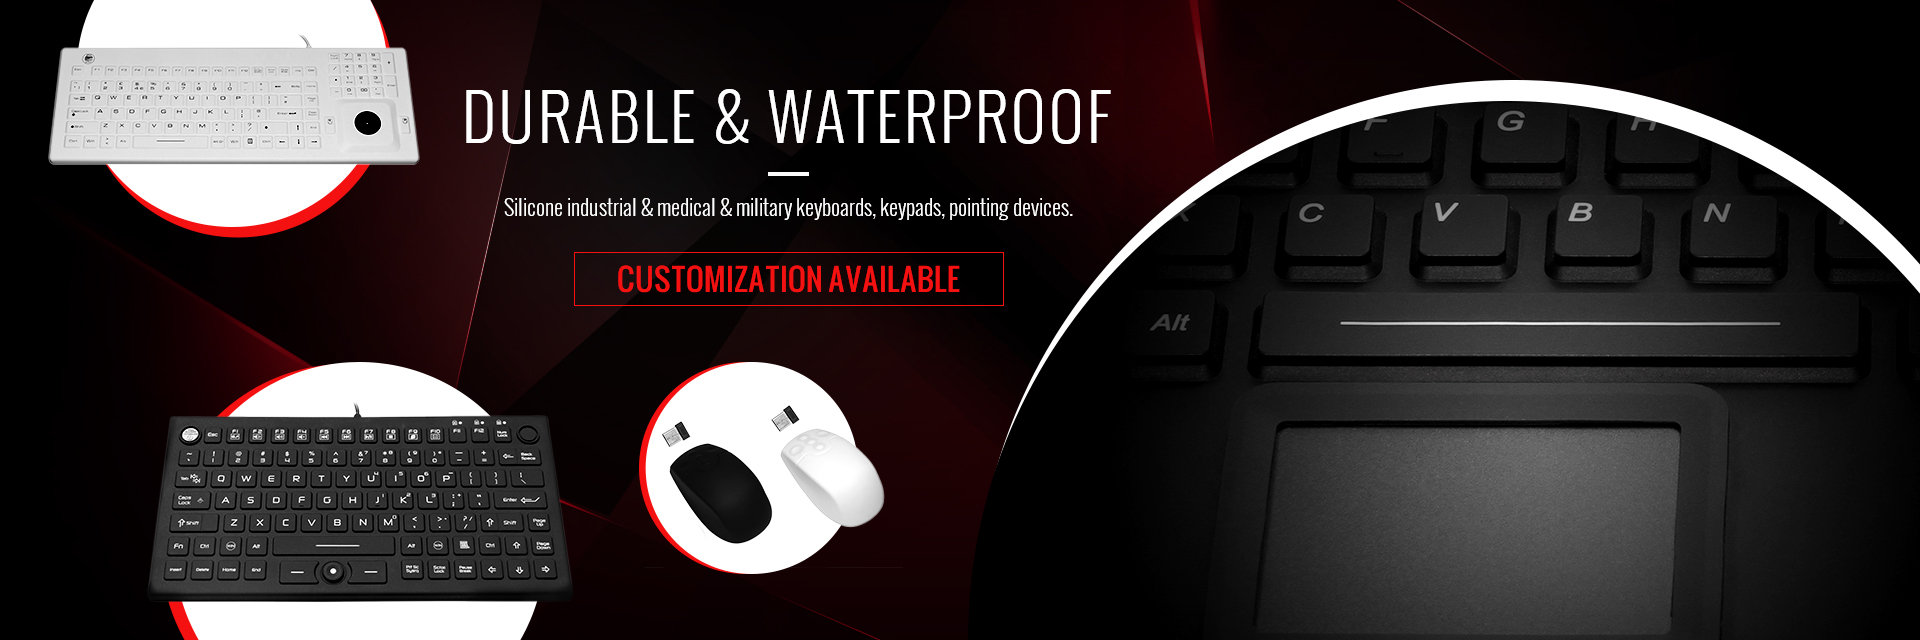 IP68 silicone medical keyboards and mouse. Tough and ruggdized.